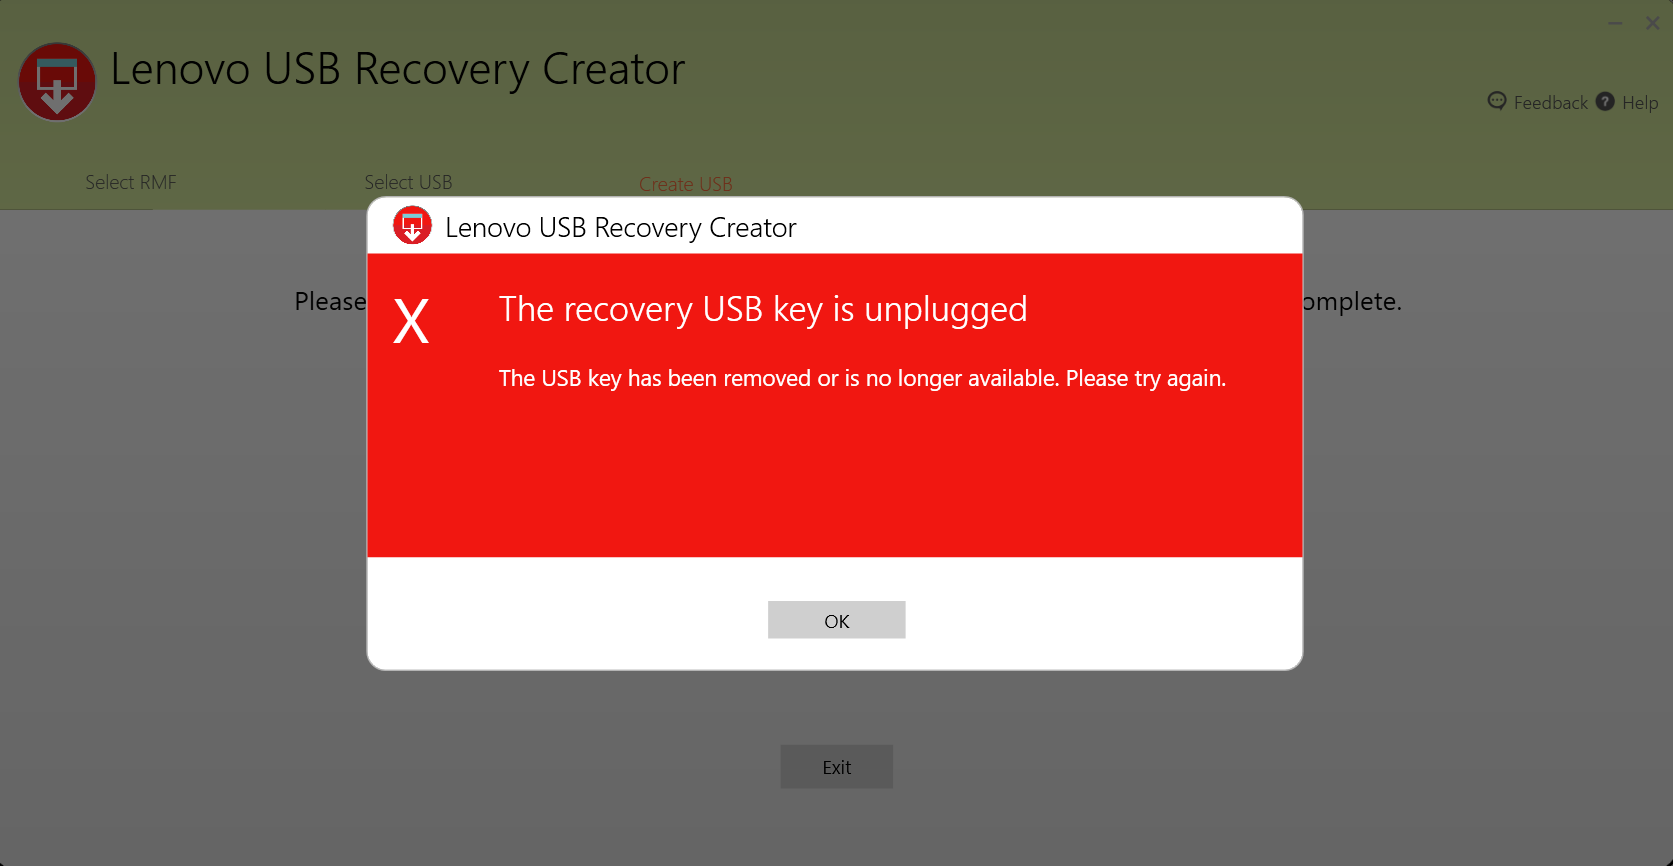 unable-to-complete-creating-recovery-usb-key - English Community - LENOVO  COMMUNITY